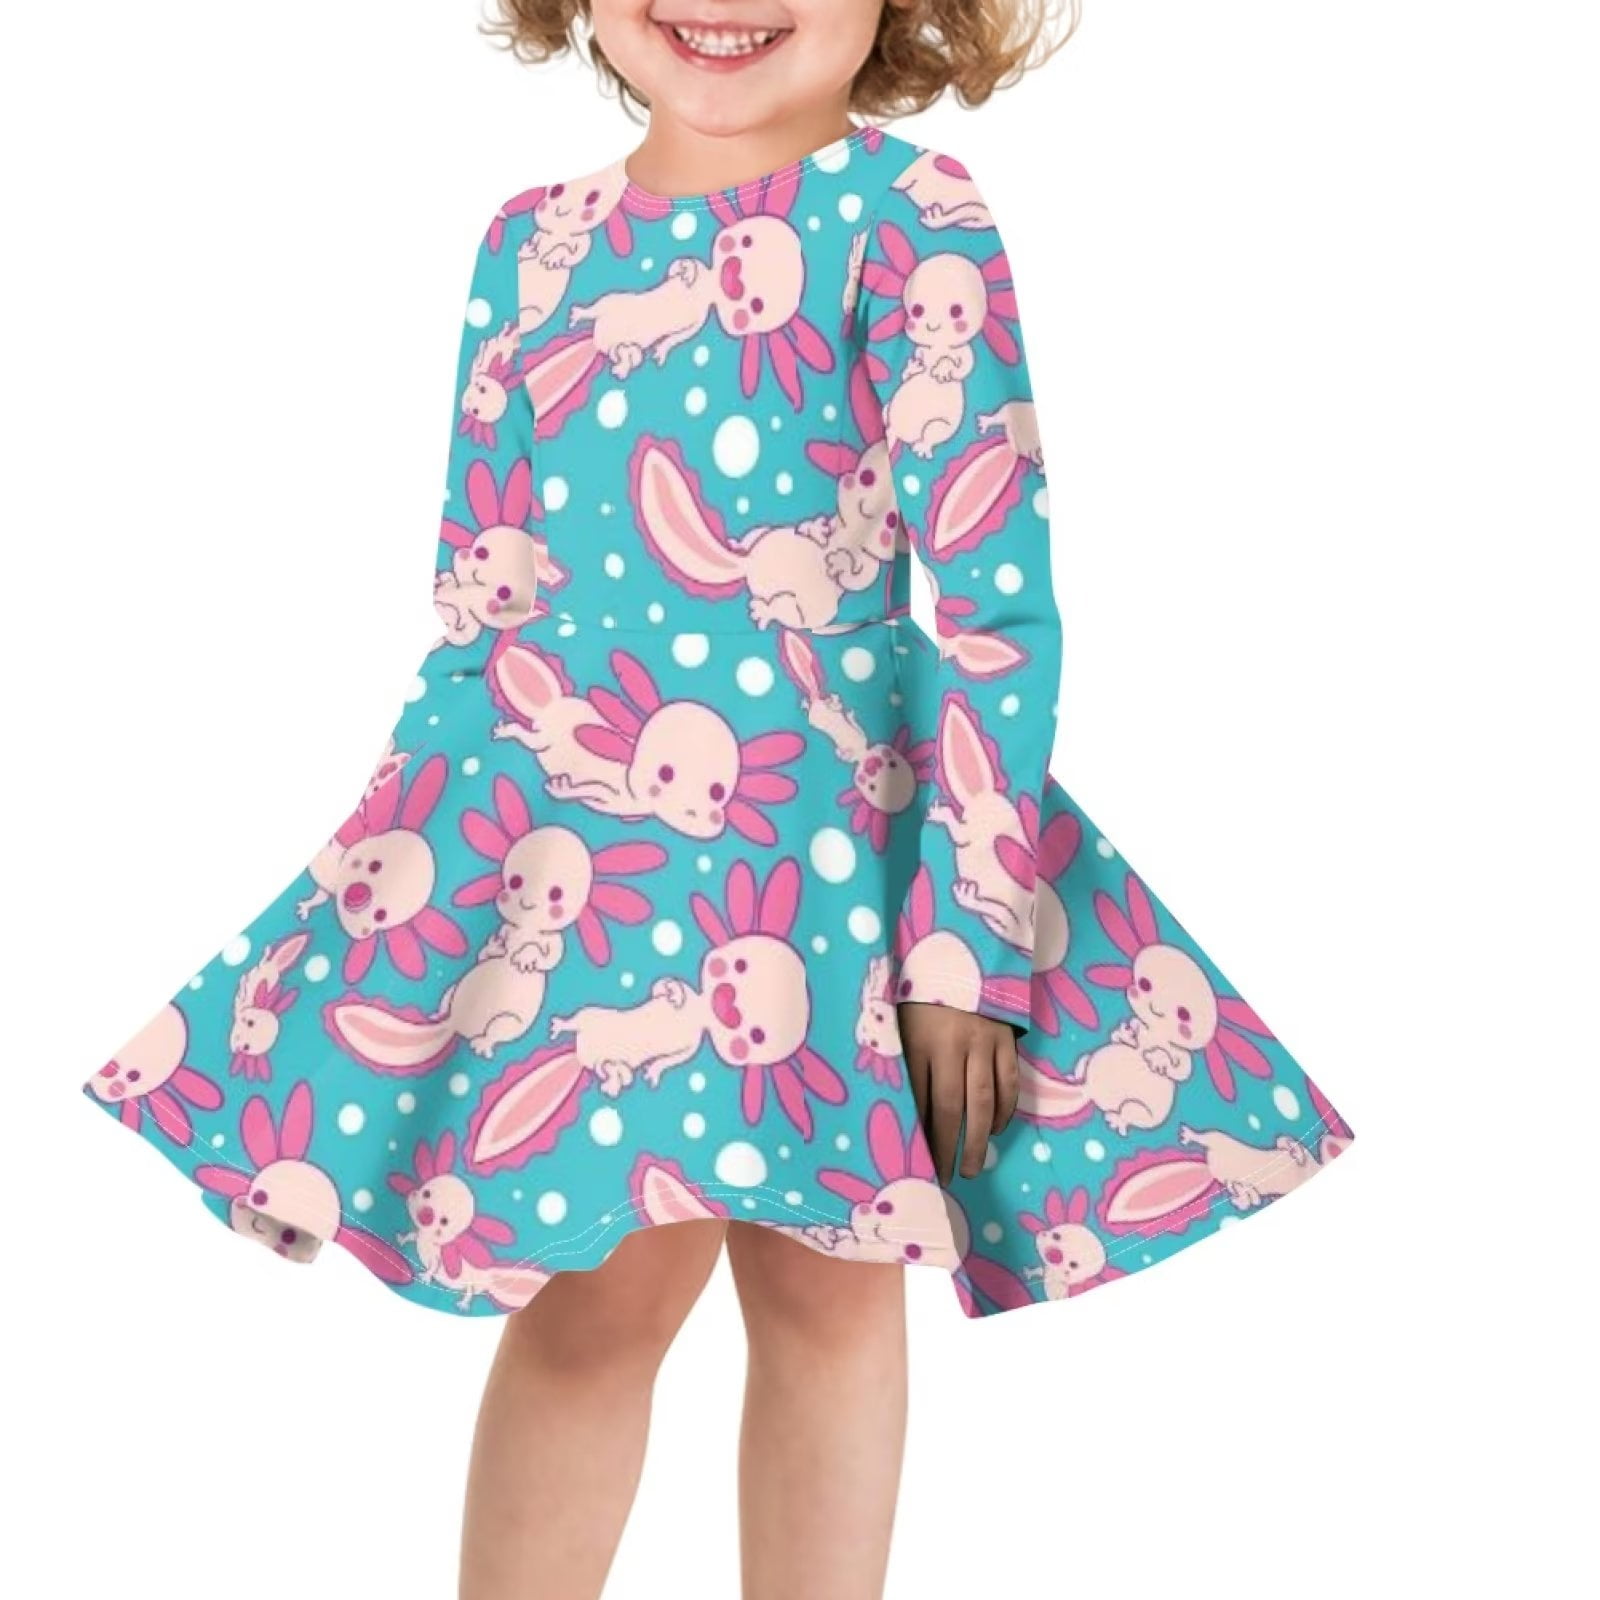 Suhoaziia Cyan Dress Up Clothes for Little Girls Size 9-10 Years ...